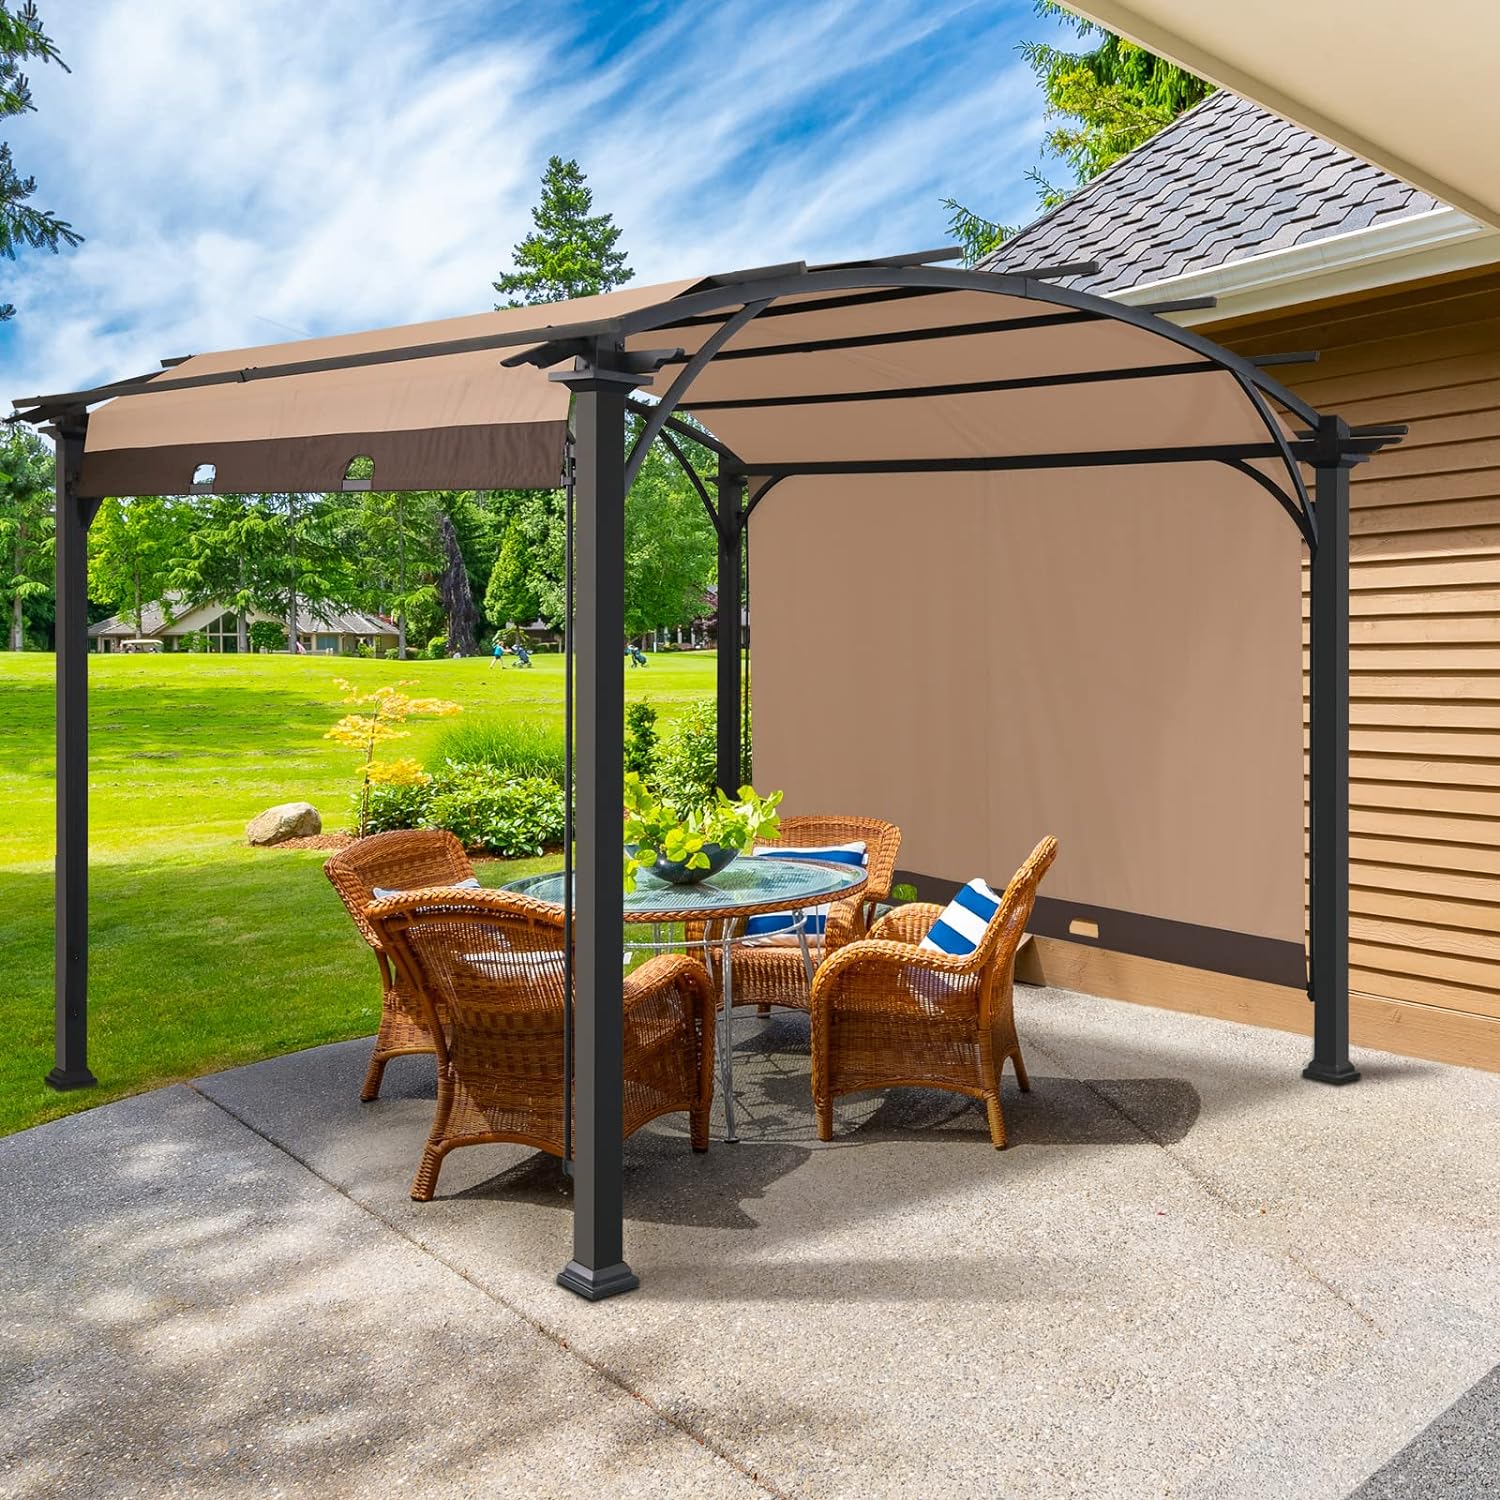 EAGLE PEAK Steel Arched Outdoor Pergola 11.4 x 11.4 ft. with Retractable and Adjustable Shade Canopy, Metal Frame Patio, Beige